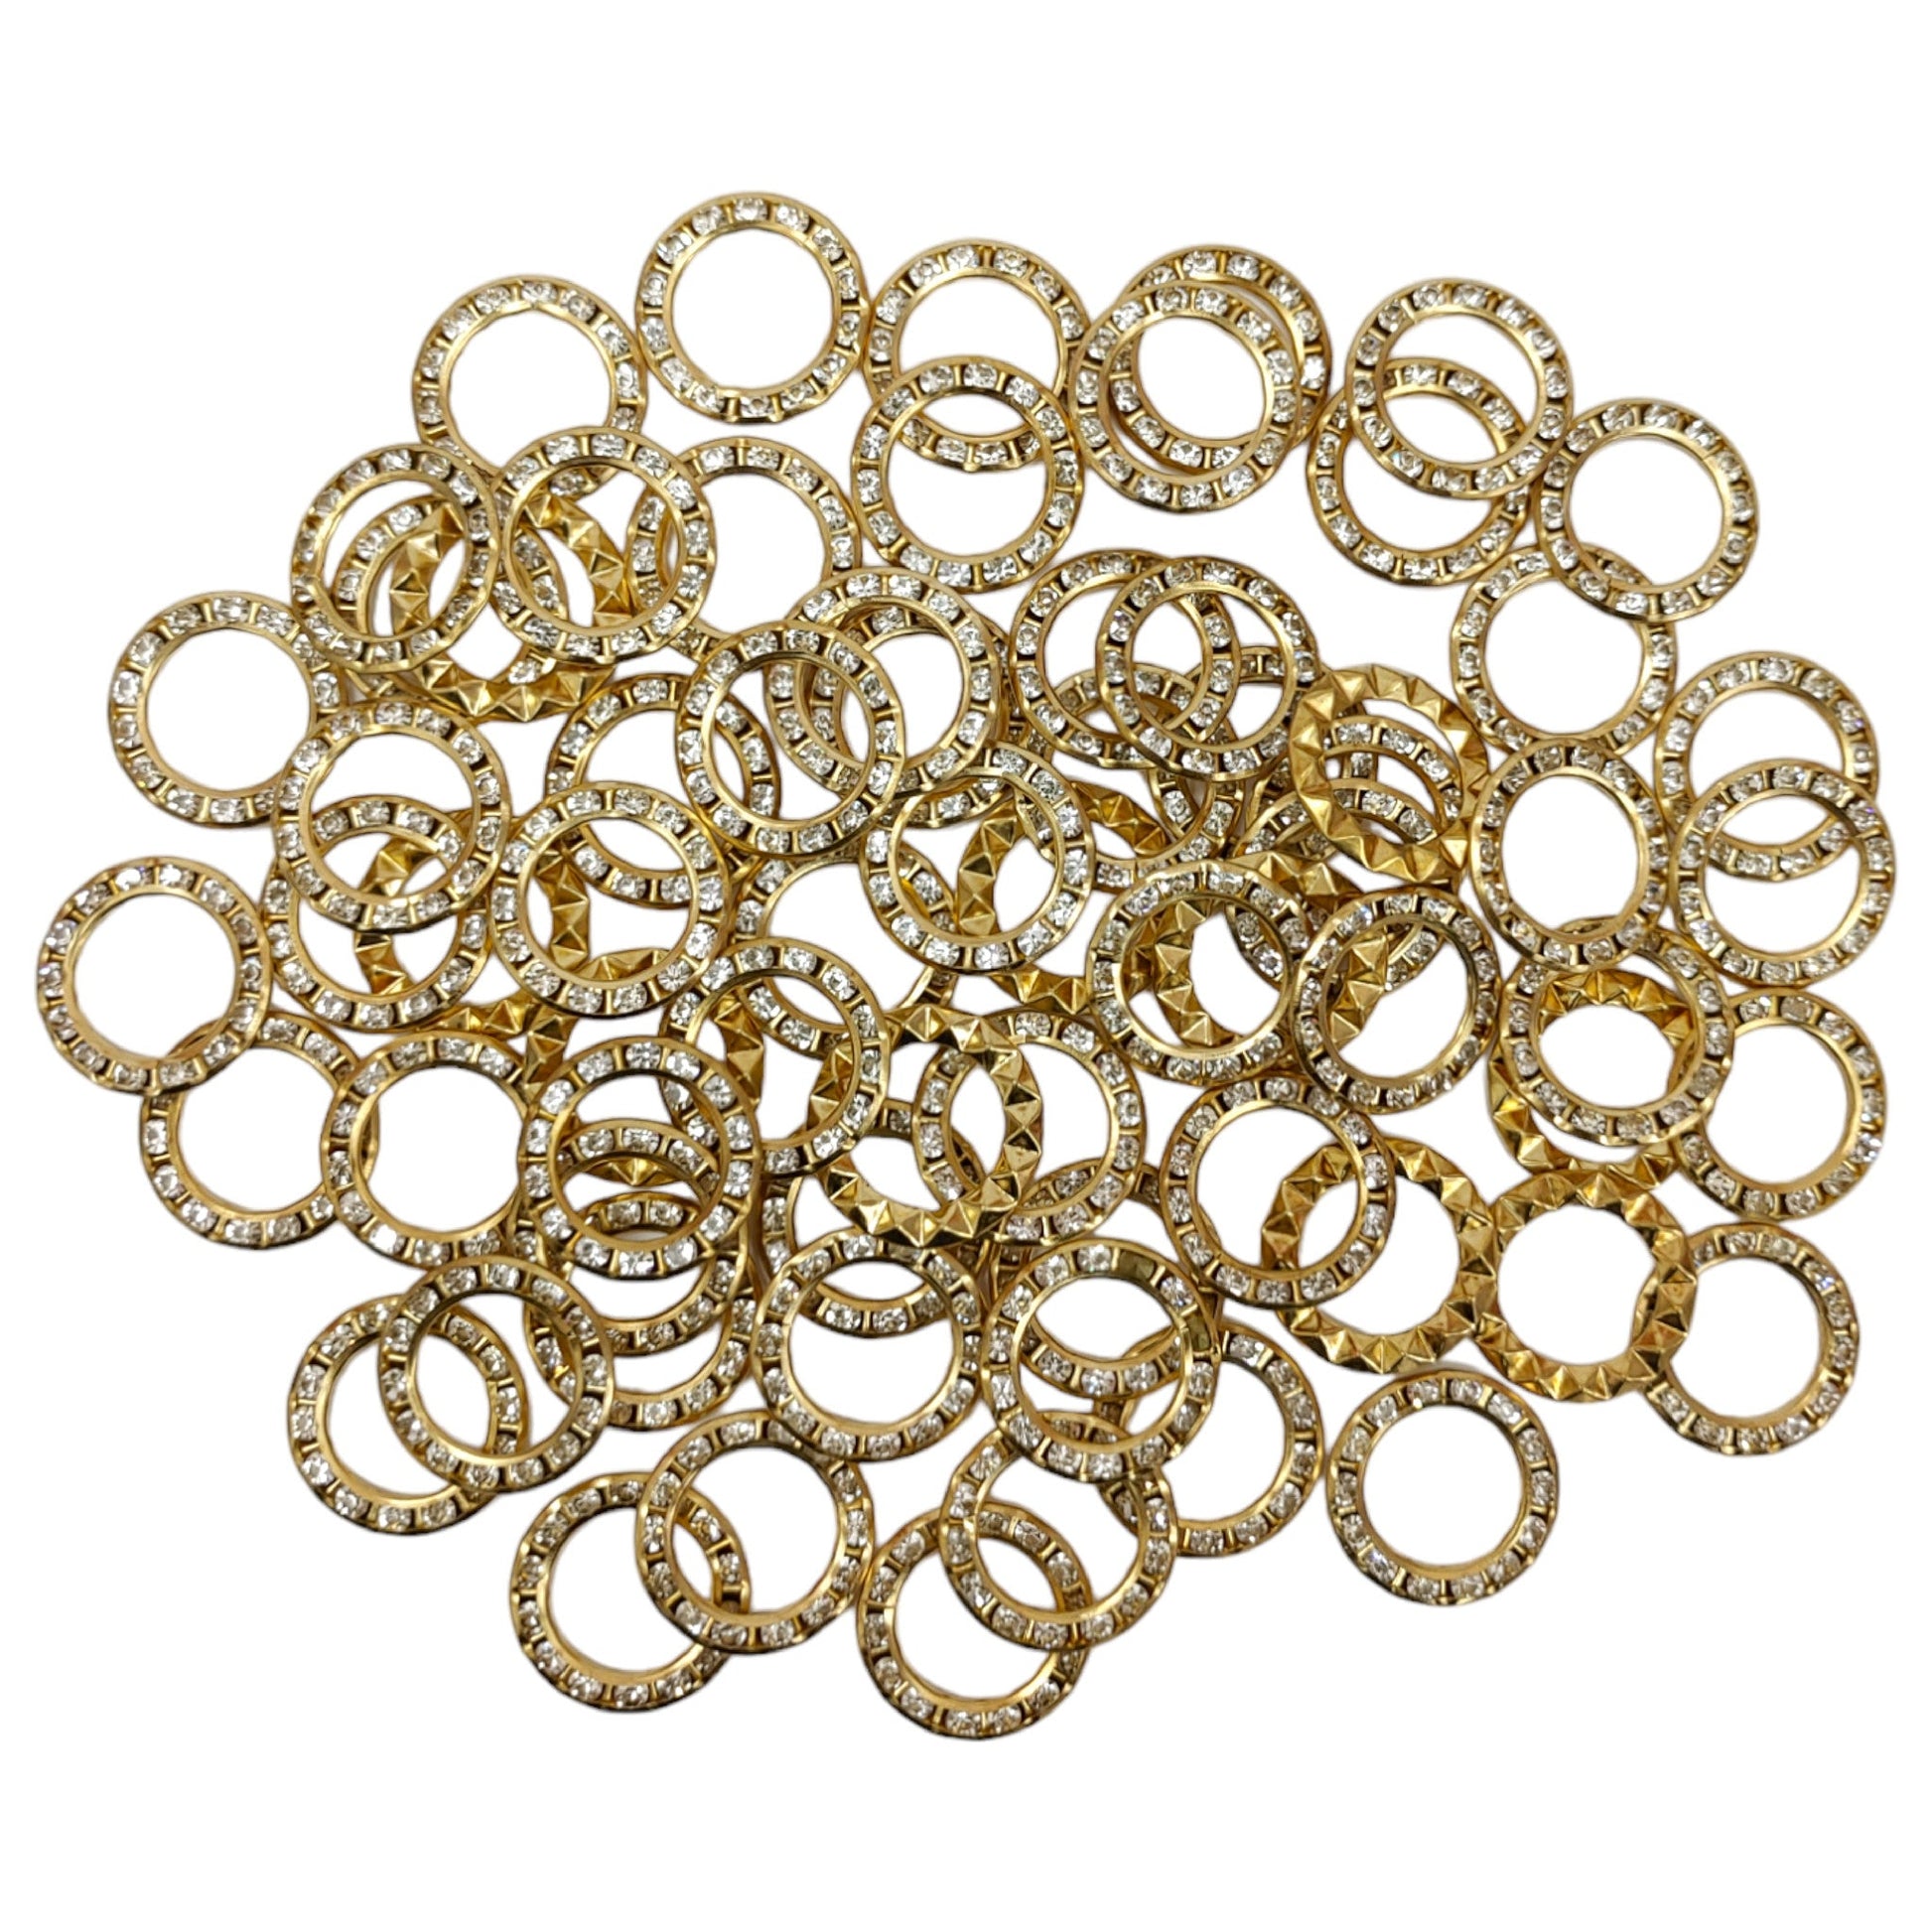 Round Rin-Stoned CCB Ring Motif for Rakhi, Jewelry making, Craft or Decor